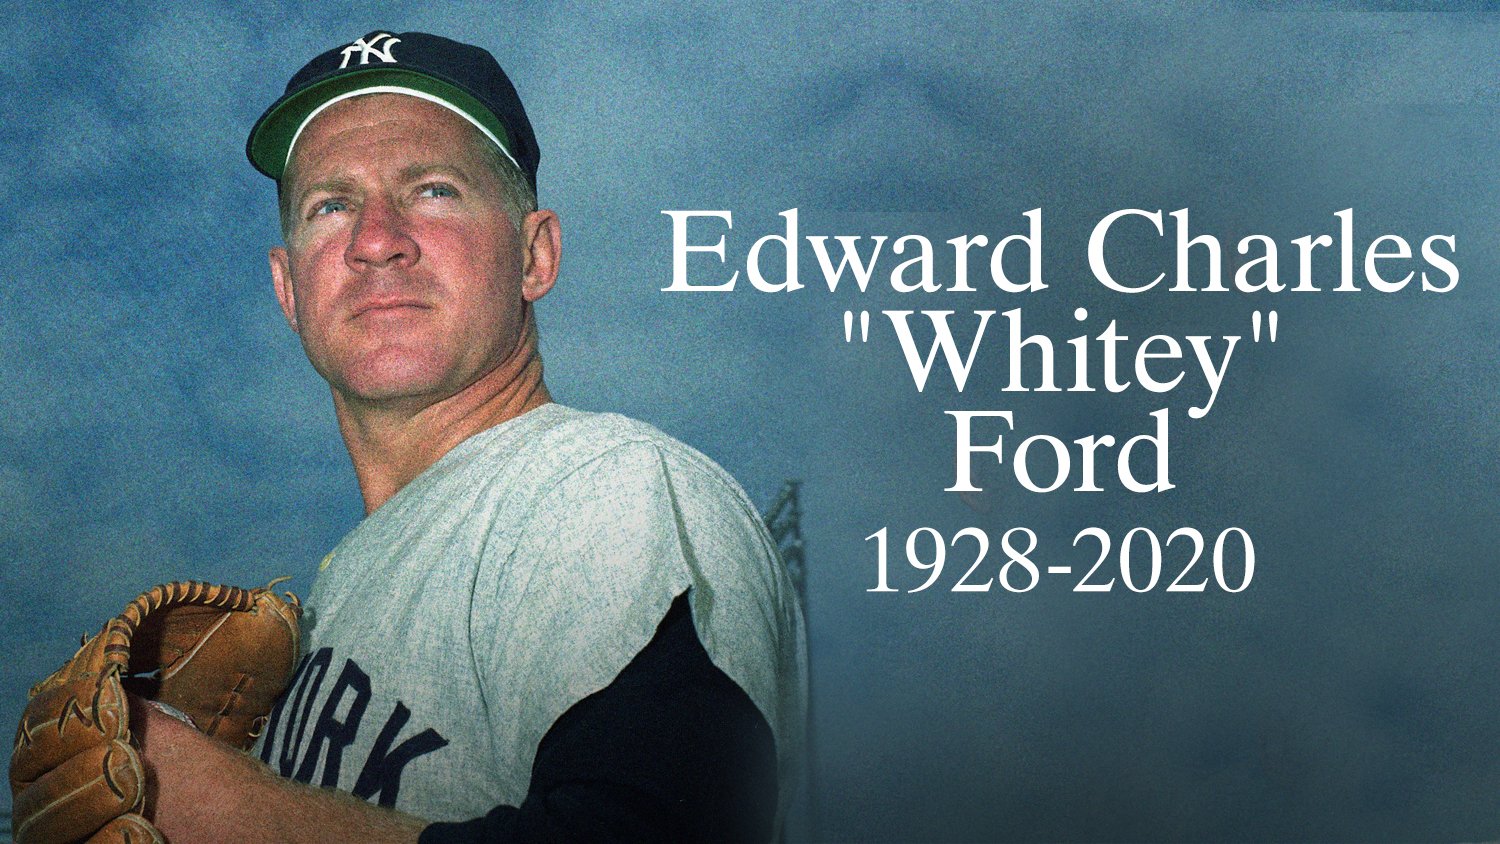 MLB on Twitter: "We mourn the passing of Edward Charles “Whitey” Ford, a  Hall of Famer and six-time World Series champion. He was 91.  https://t.co/pPE2u4Qcp1" / Twitter